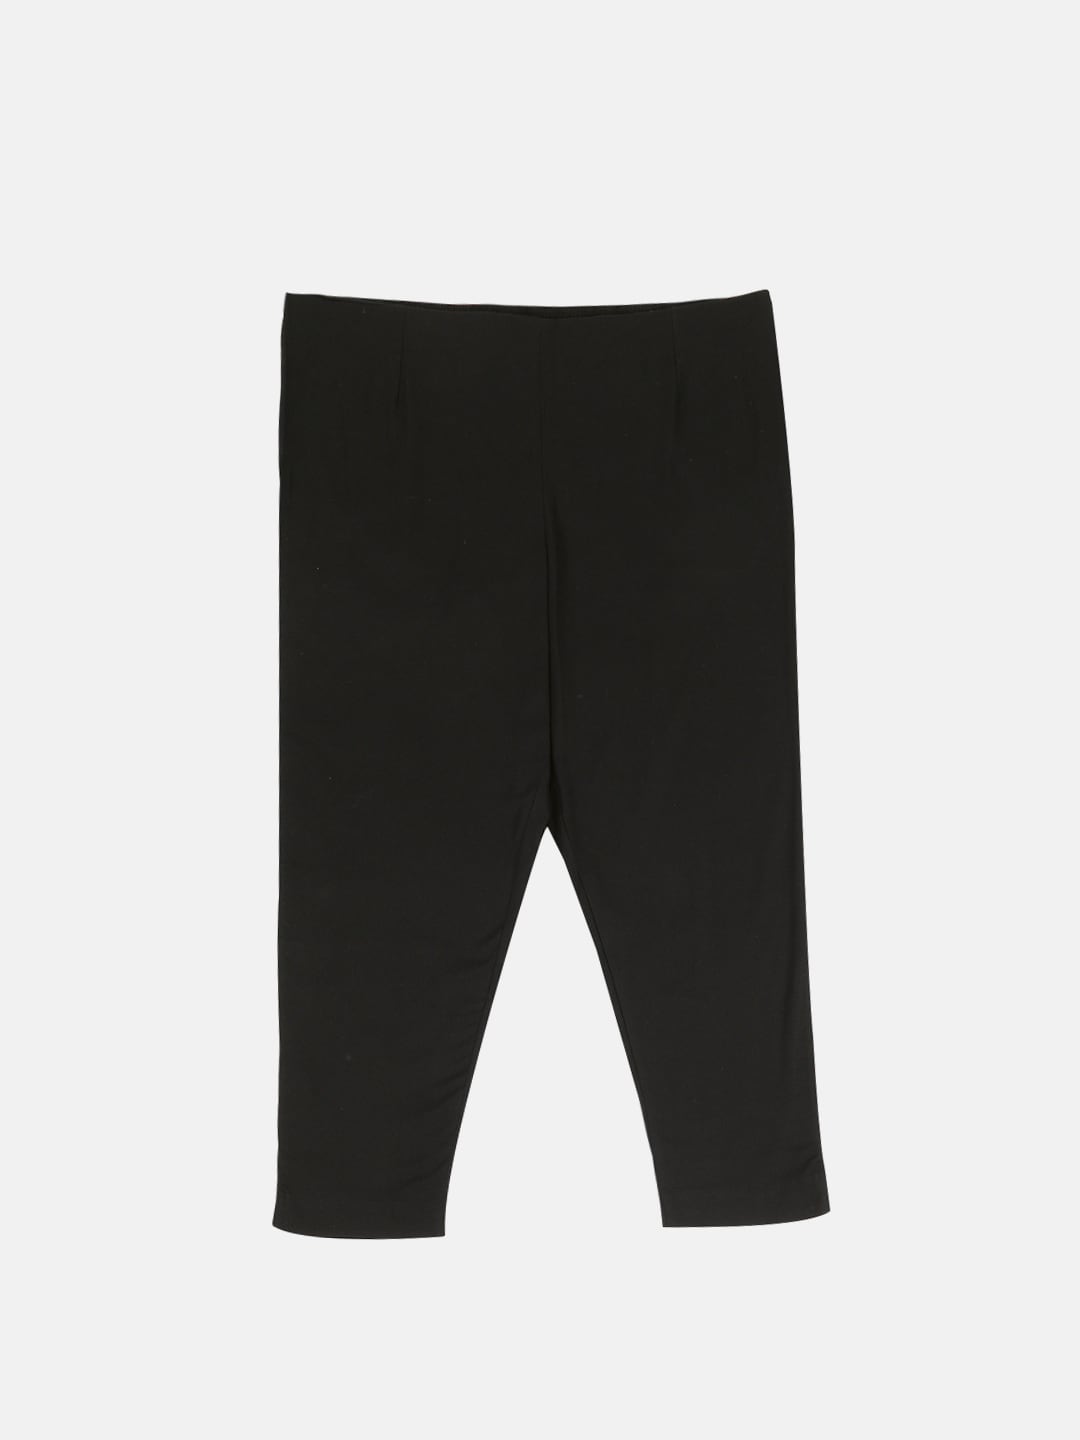 W Women Black Solid Regular Trousers Price in India